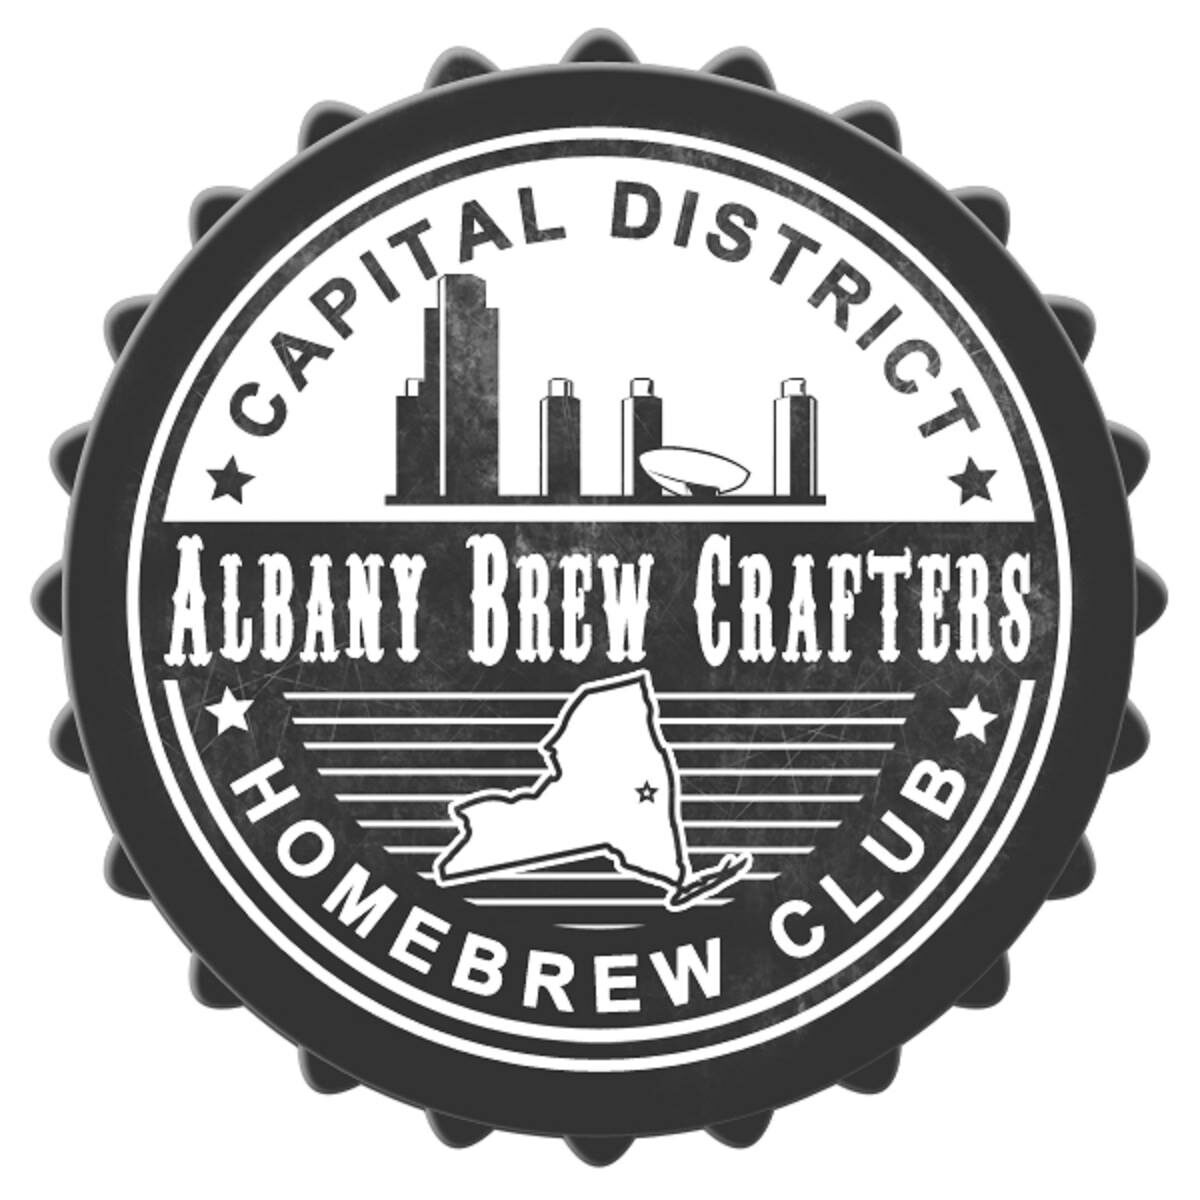 Albany Brew Crafters